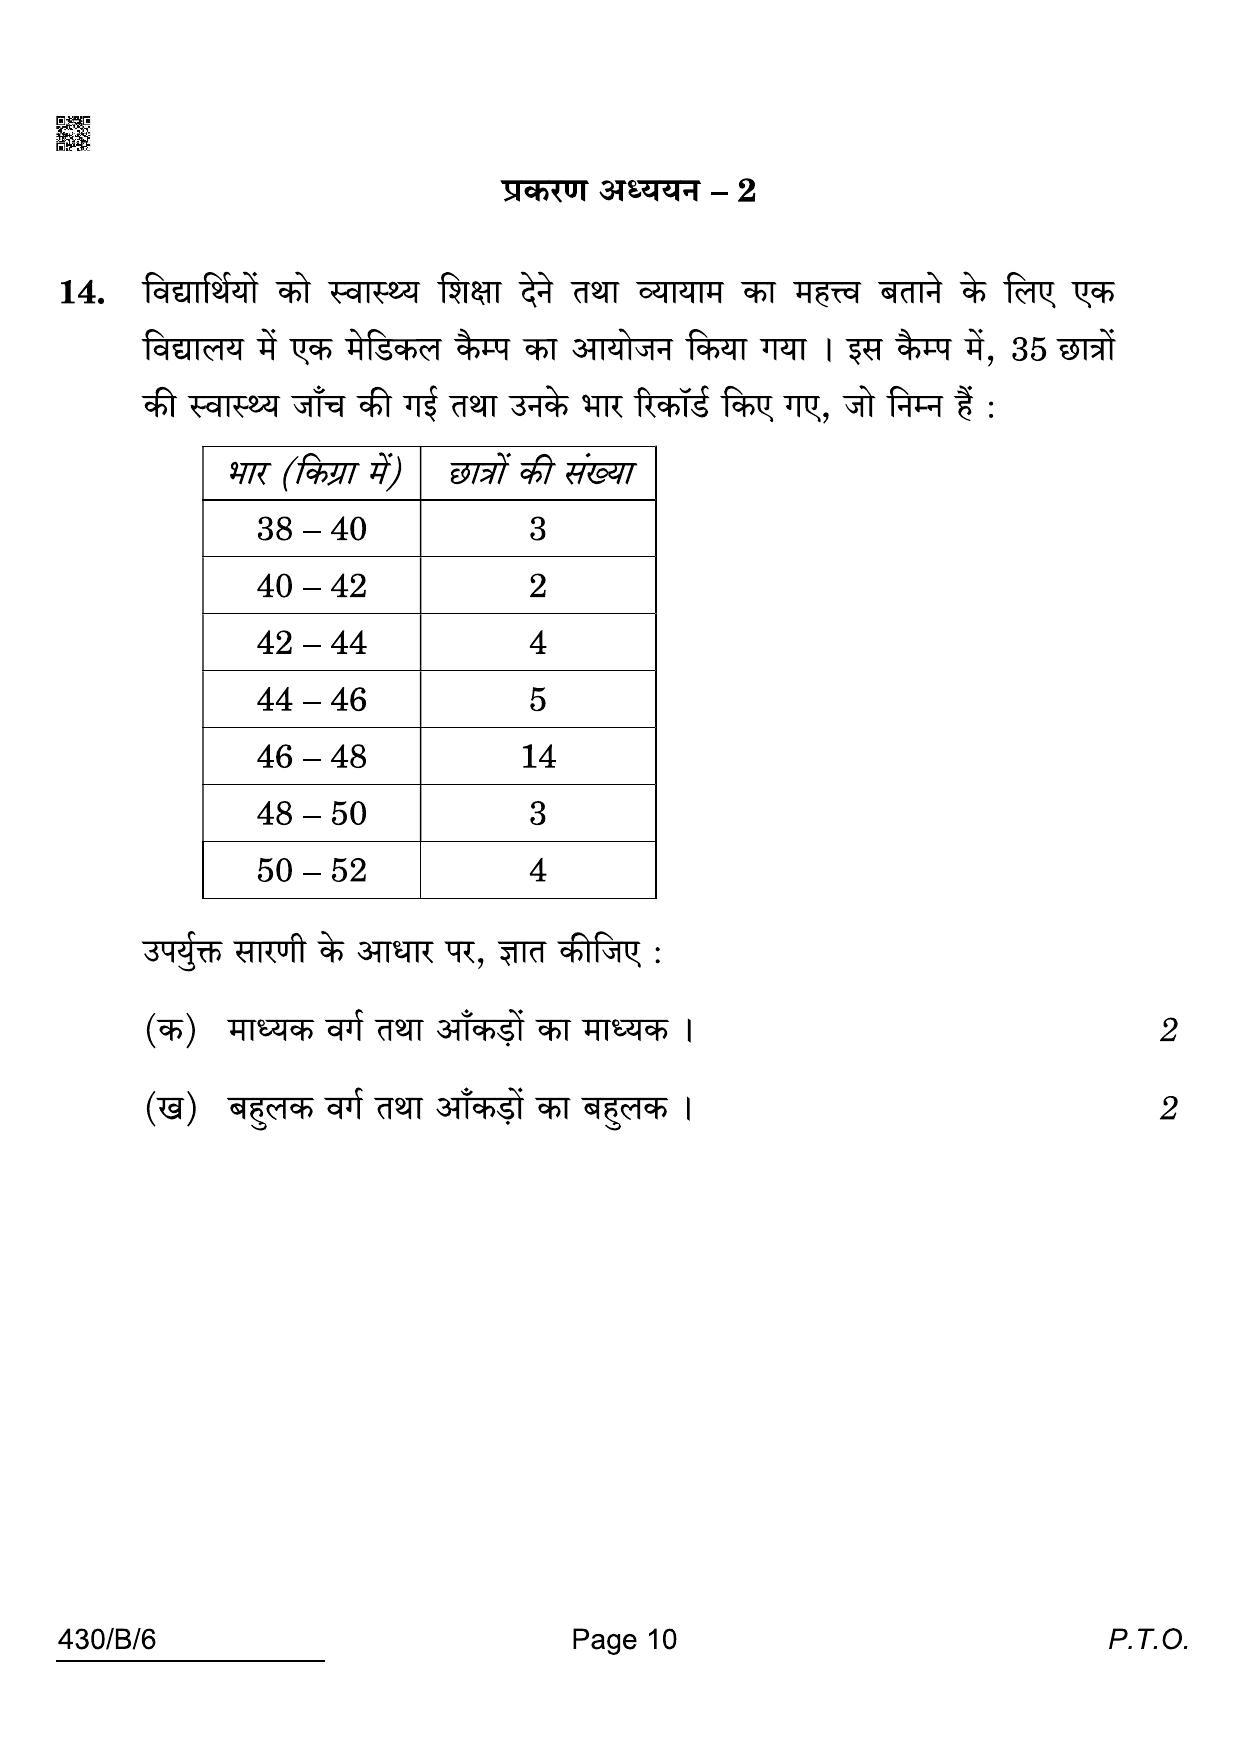 CBSE Class 10 430-B-6 Maths Basic Blind 2022 Compartment Question Paper - Page 10